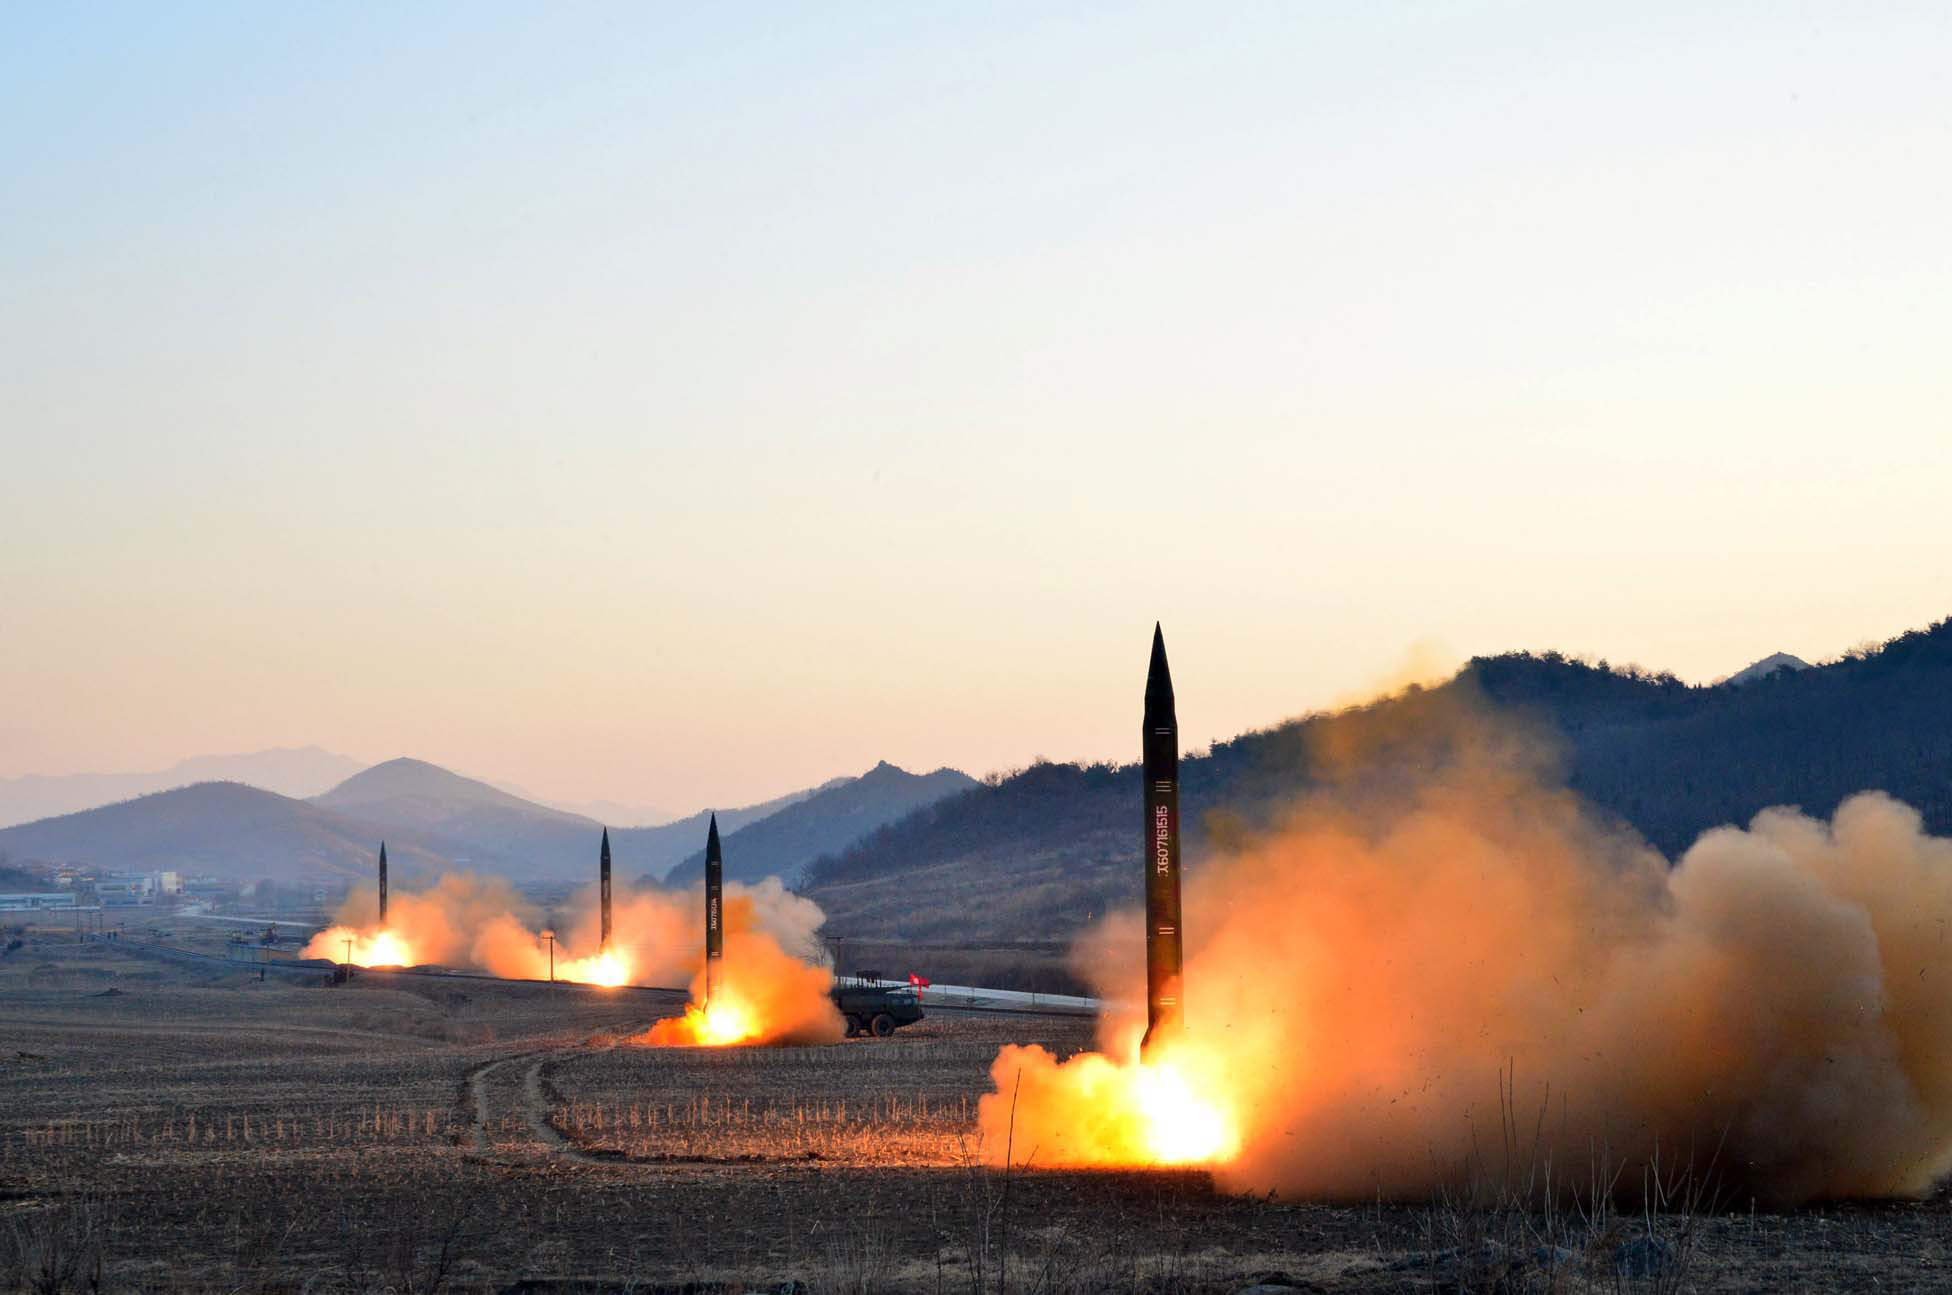 This undated picture released by North Korea's Korean Central News Agency (KCNA) via KNS on March 7, 2017 shows the launch of four ballistic missiles by the Korean People's Army (KPA) during a military drill at an undisclosed location in North Korea. (STR—AFP/Getty Images)